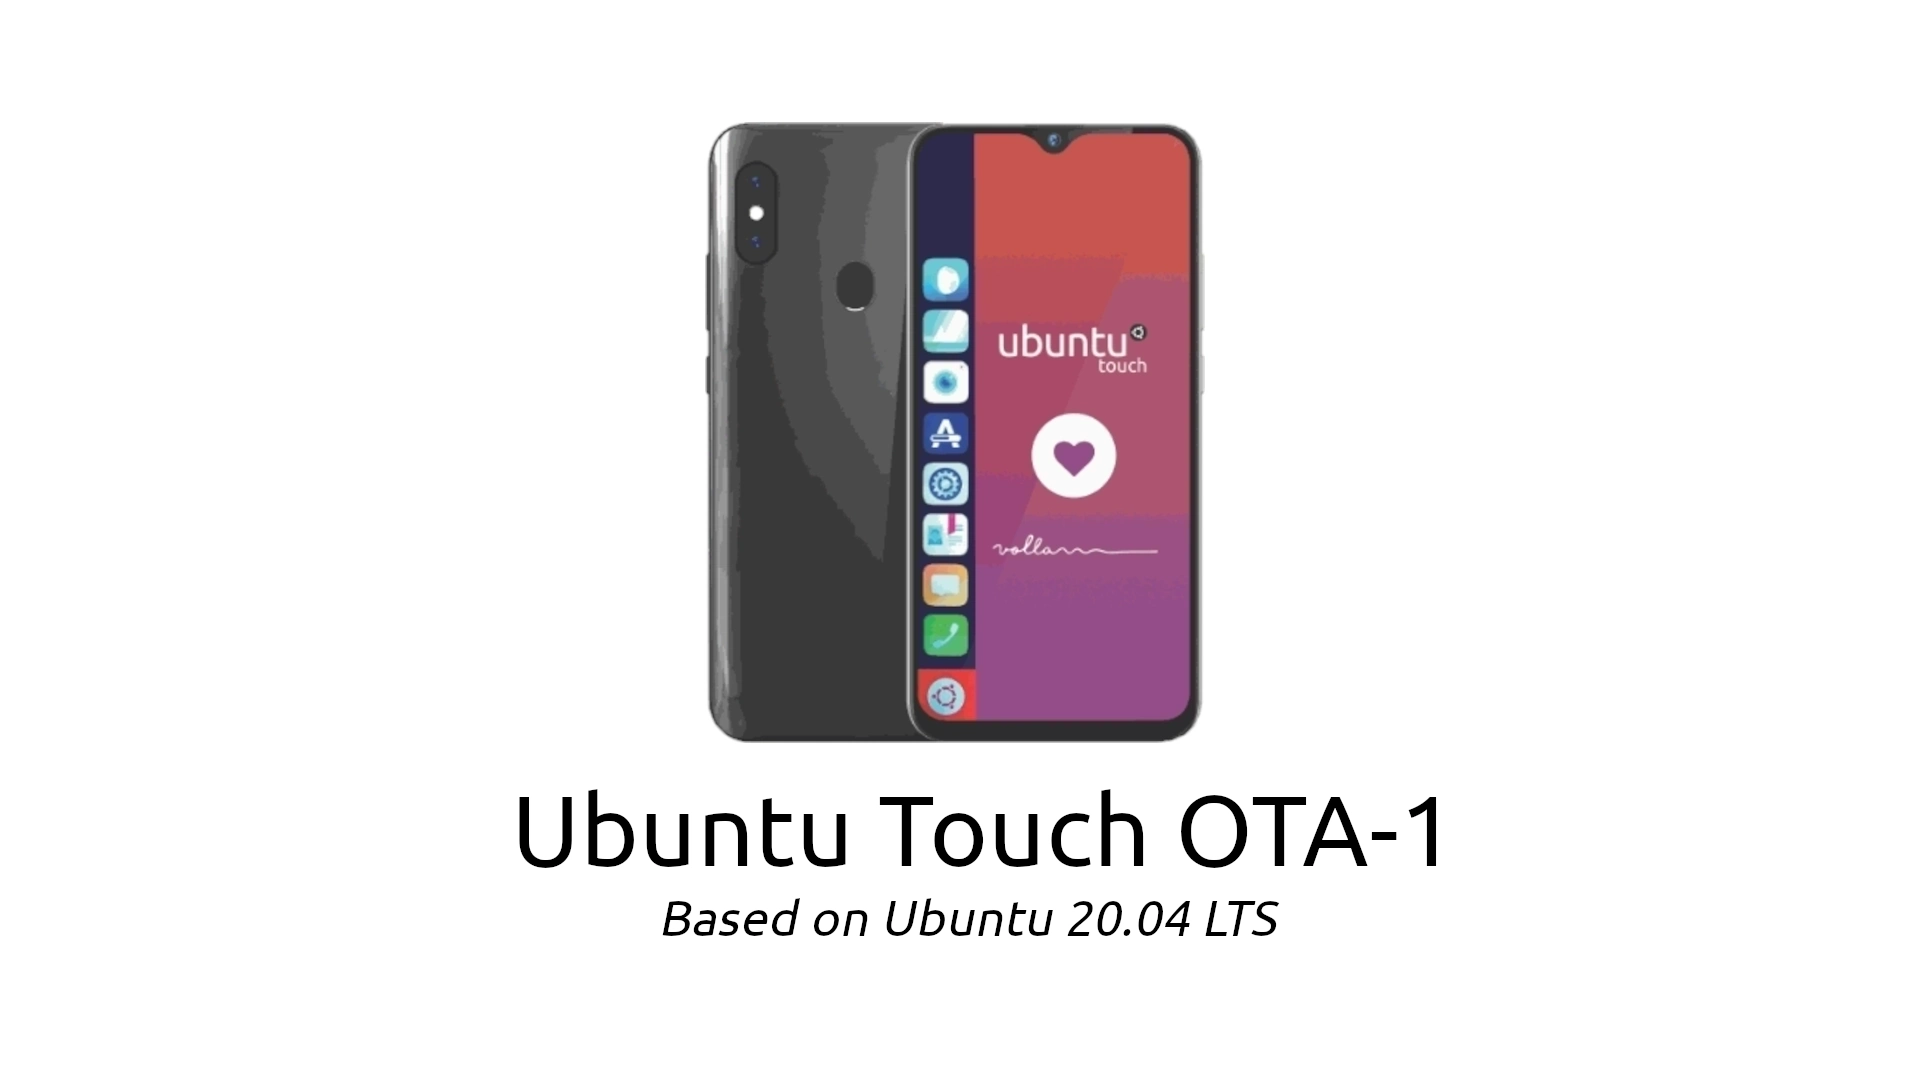 First Ubuntu Touch OTA Release Based on Ubuntu 20.04 LTS Is Out Now